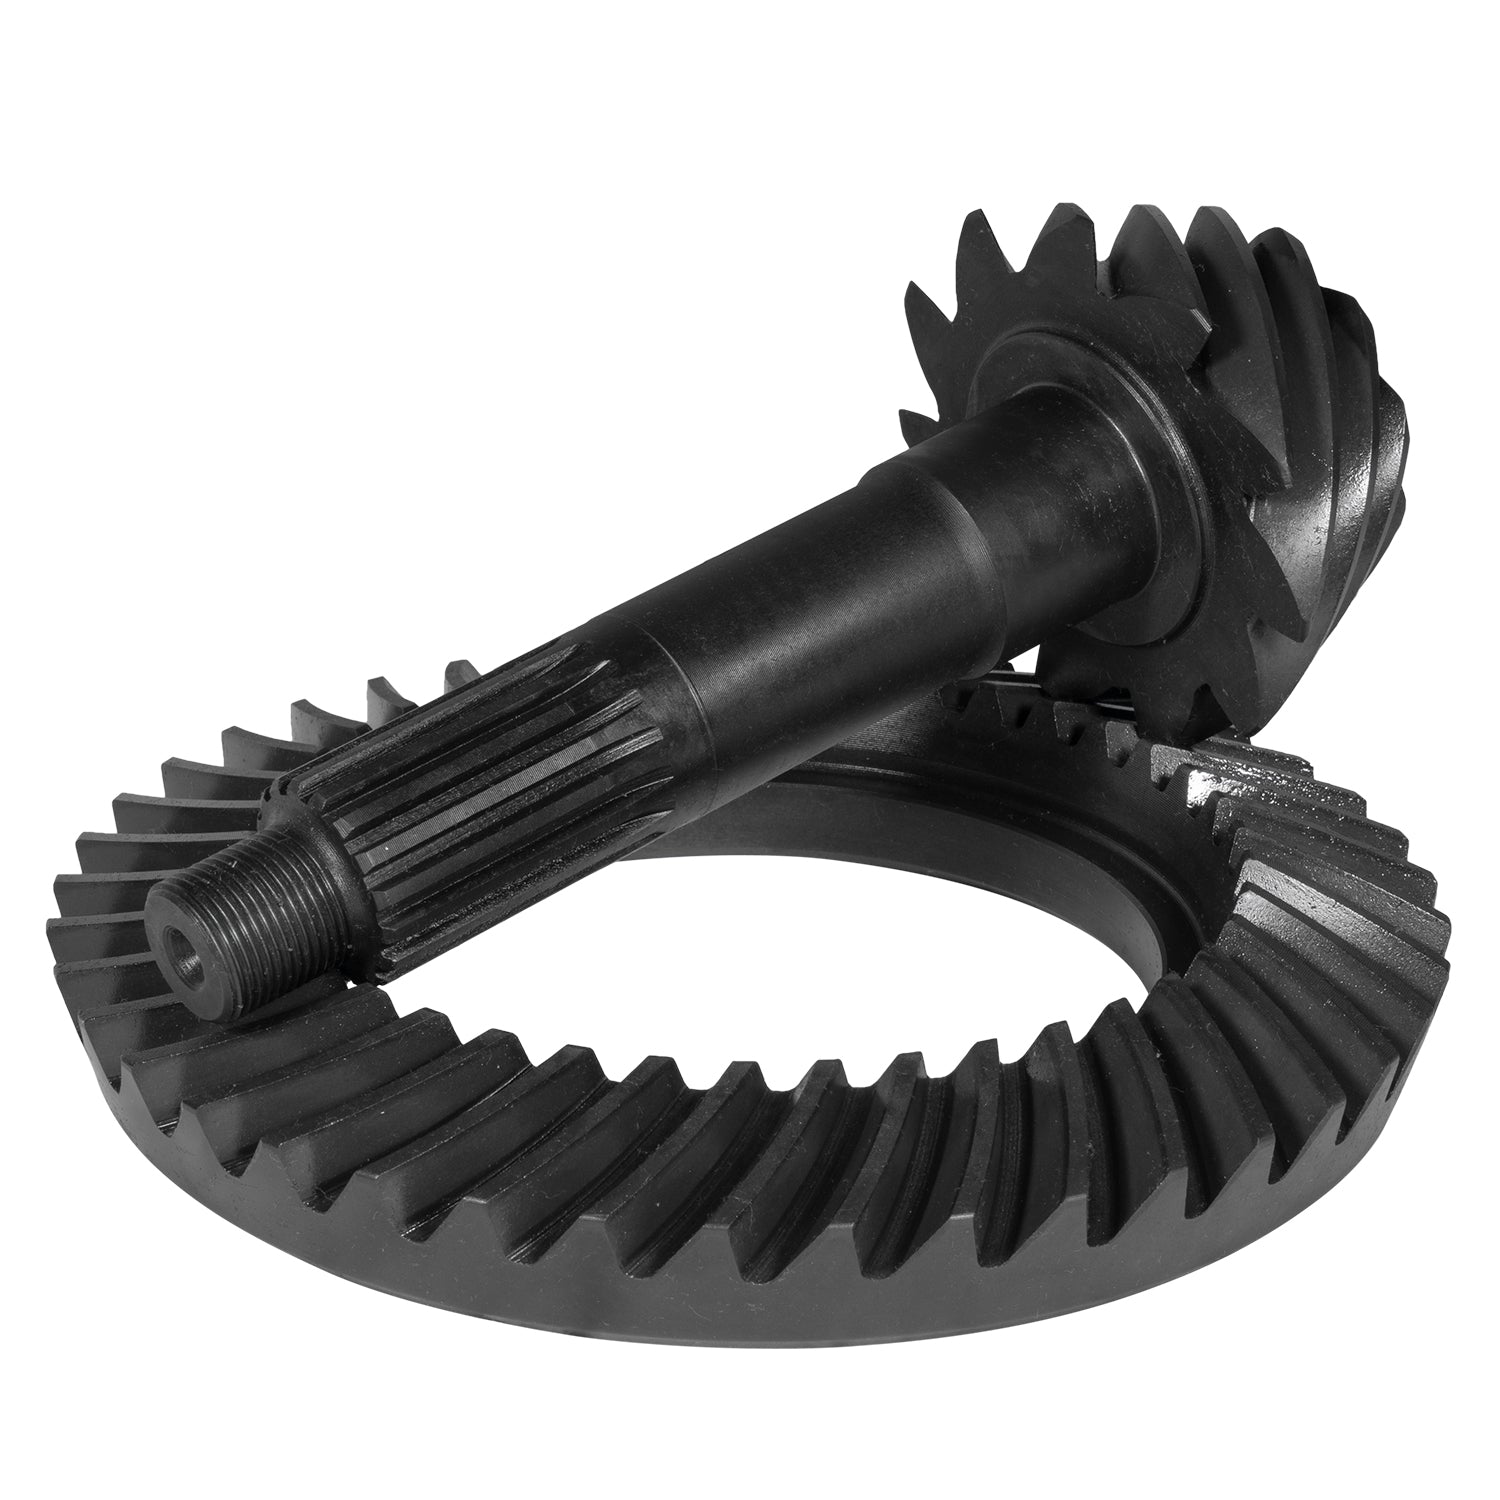 Yukon Gear Chevrolet Differential Ring and Pinion Kit - Rear YGK2365